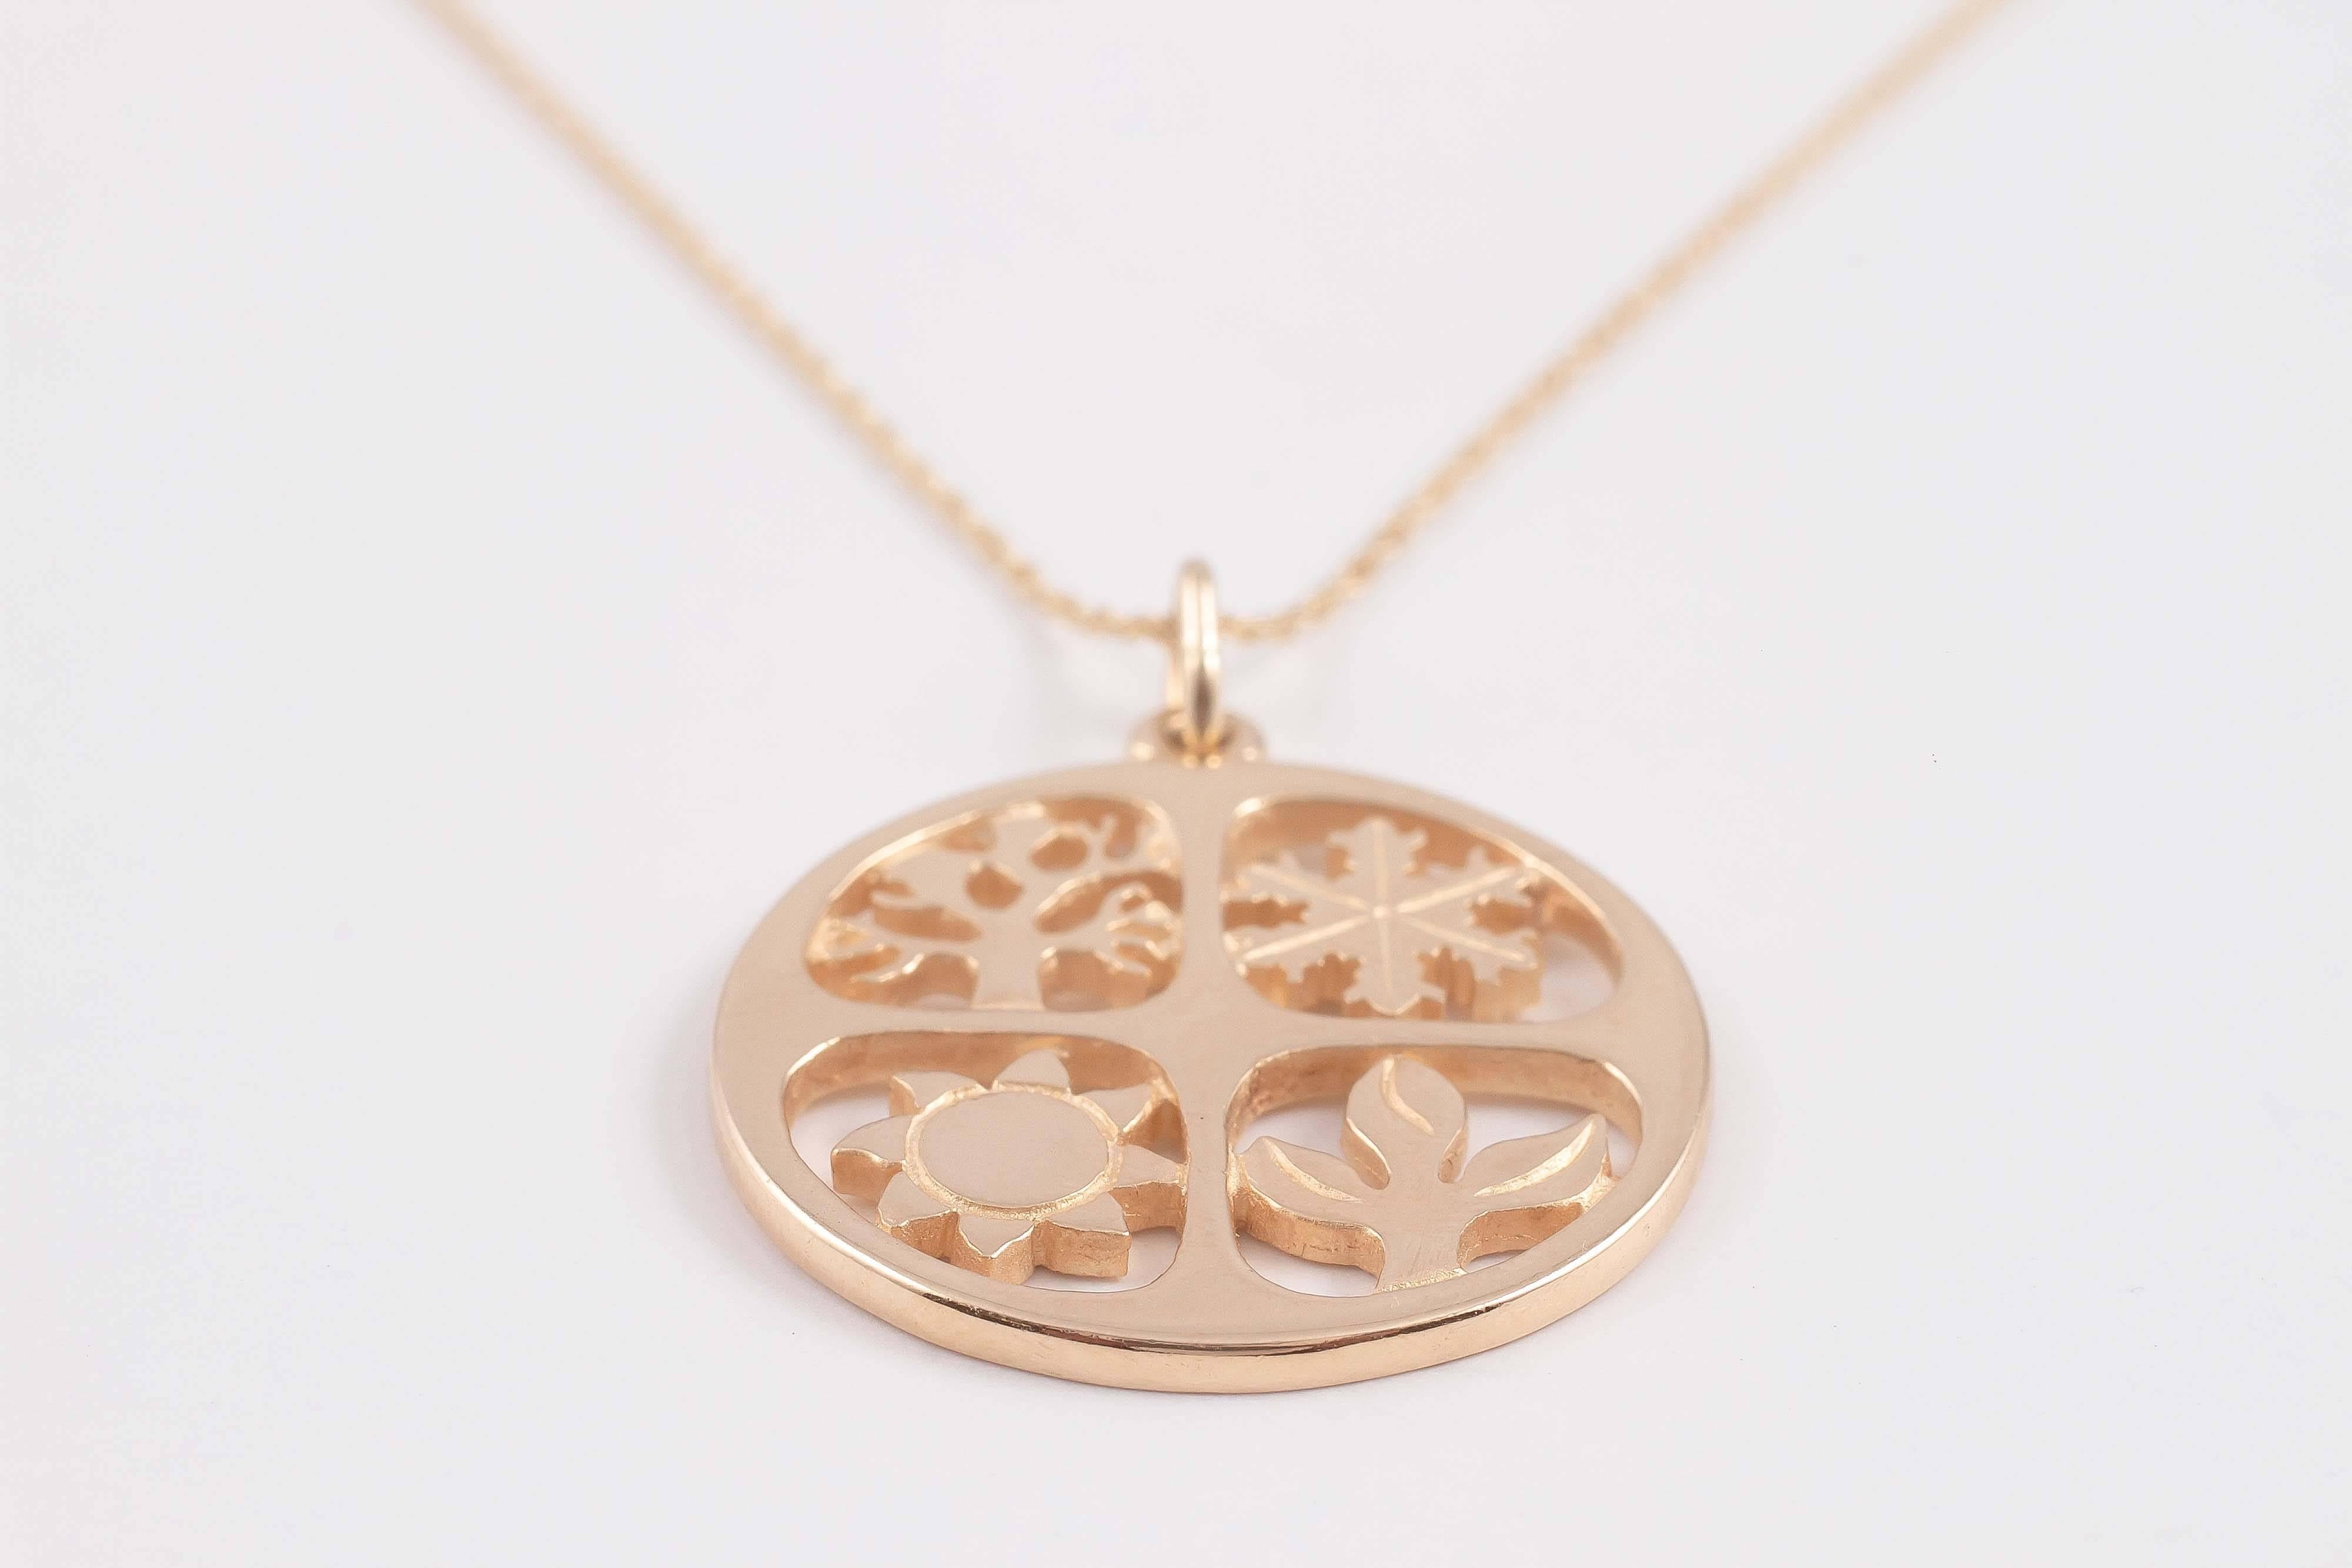 Contemporary James Avery Four Seasons Gold Pendant and Chain